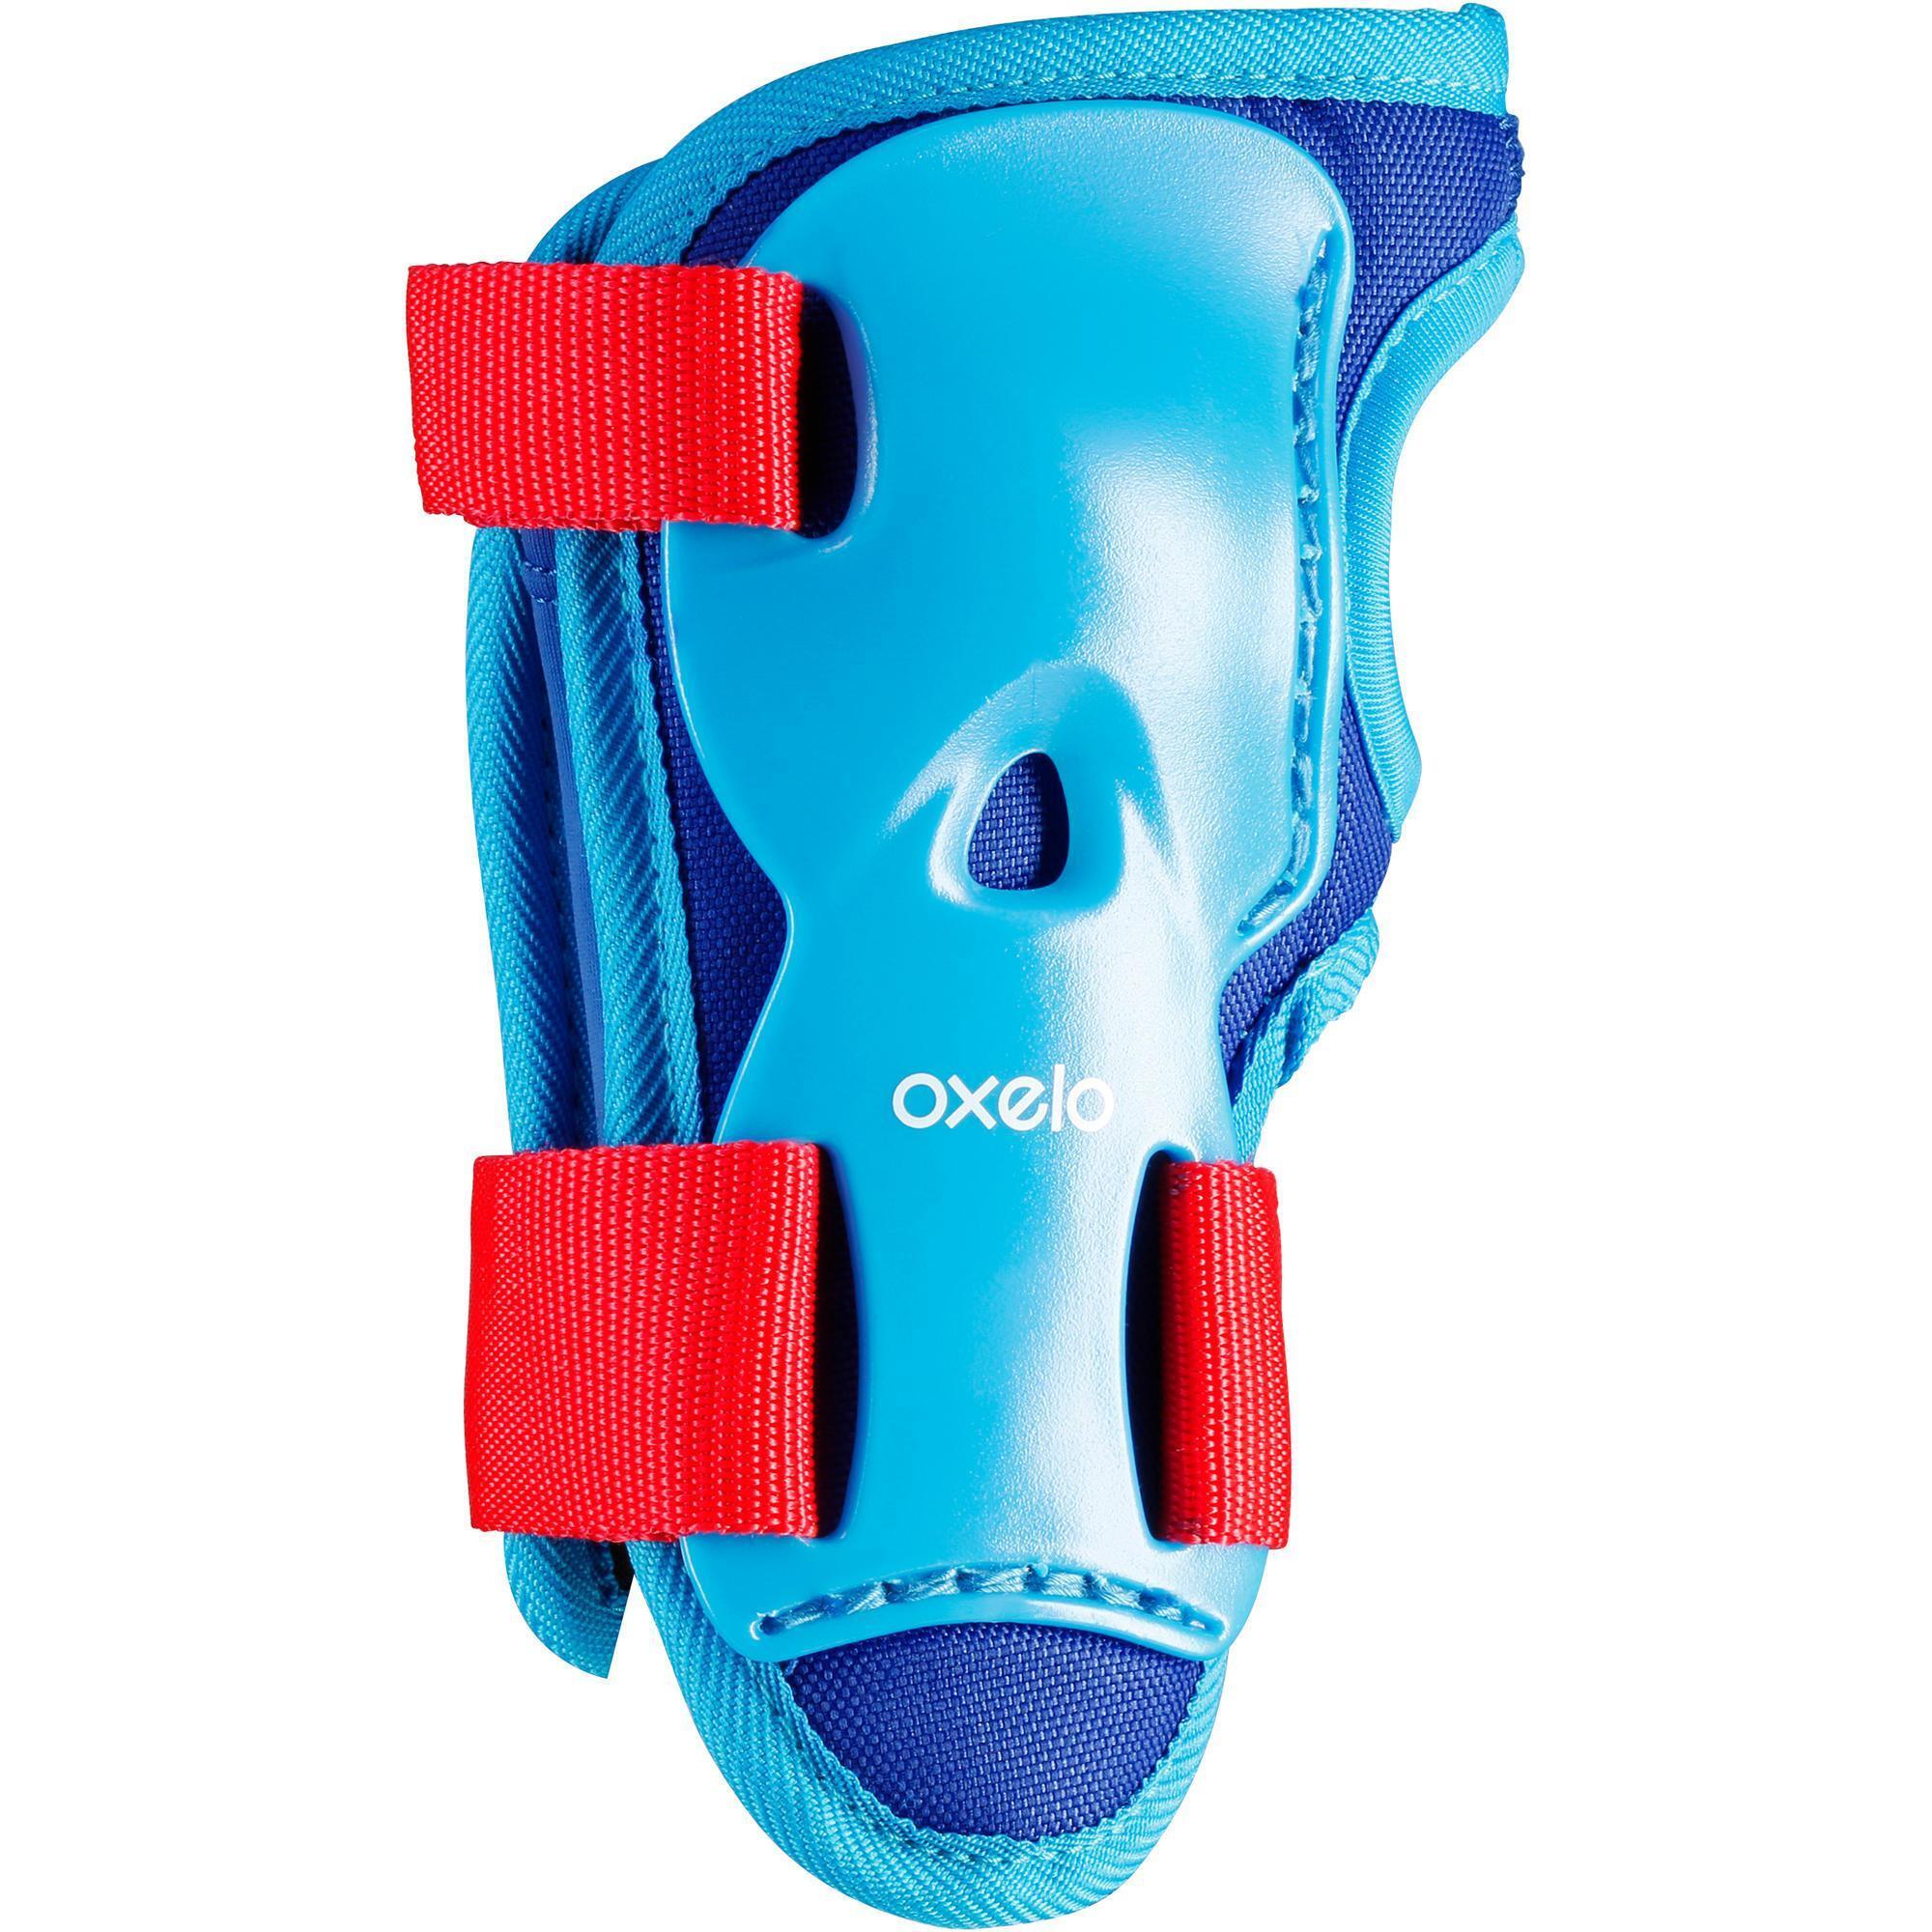 Kids' 2 x 3-Piece Inline Skating Scooter Skateboard Protective Gear Play - Blue 4/11